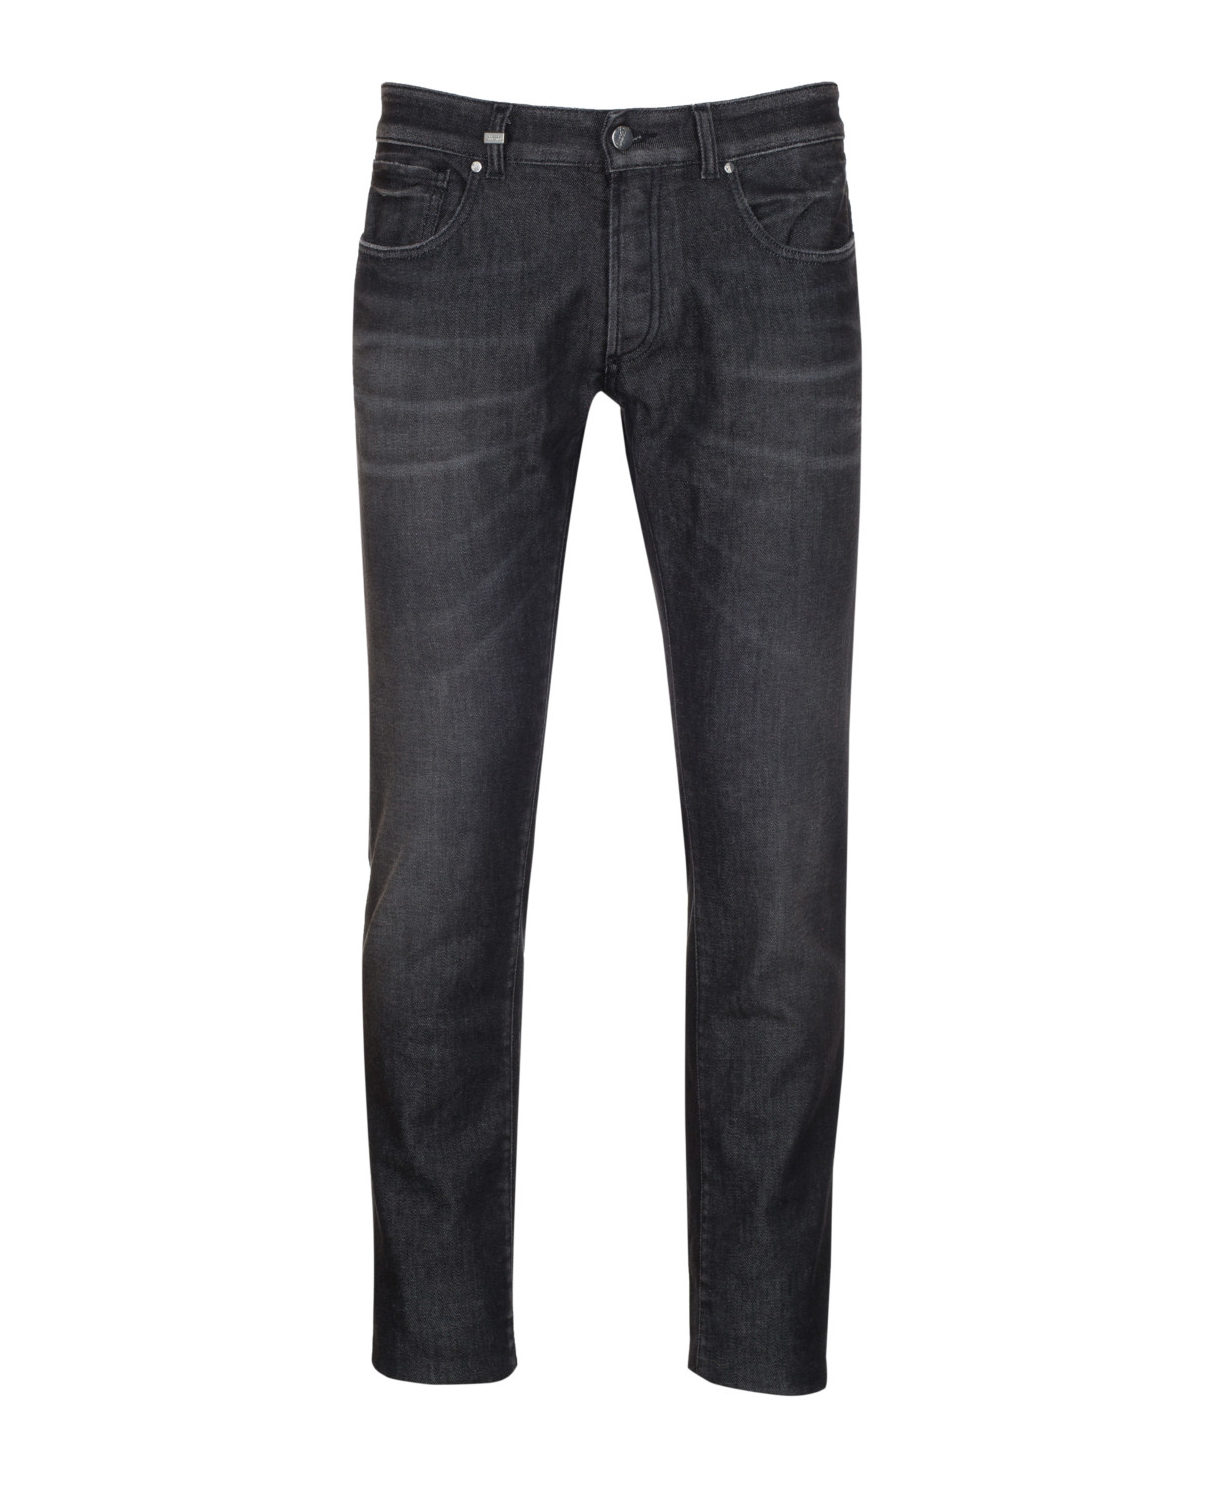 www.couturepoint.com-versace-collection-mens-black-stretch-cotton-embellished-new-fit-denim-jeans